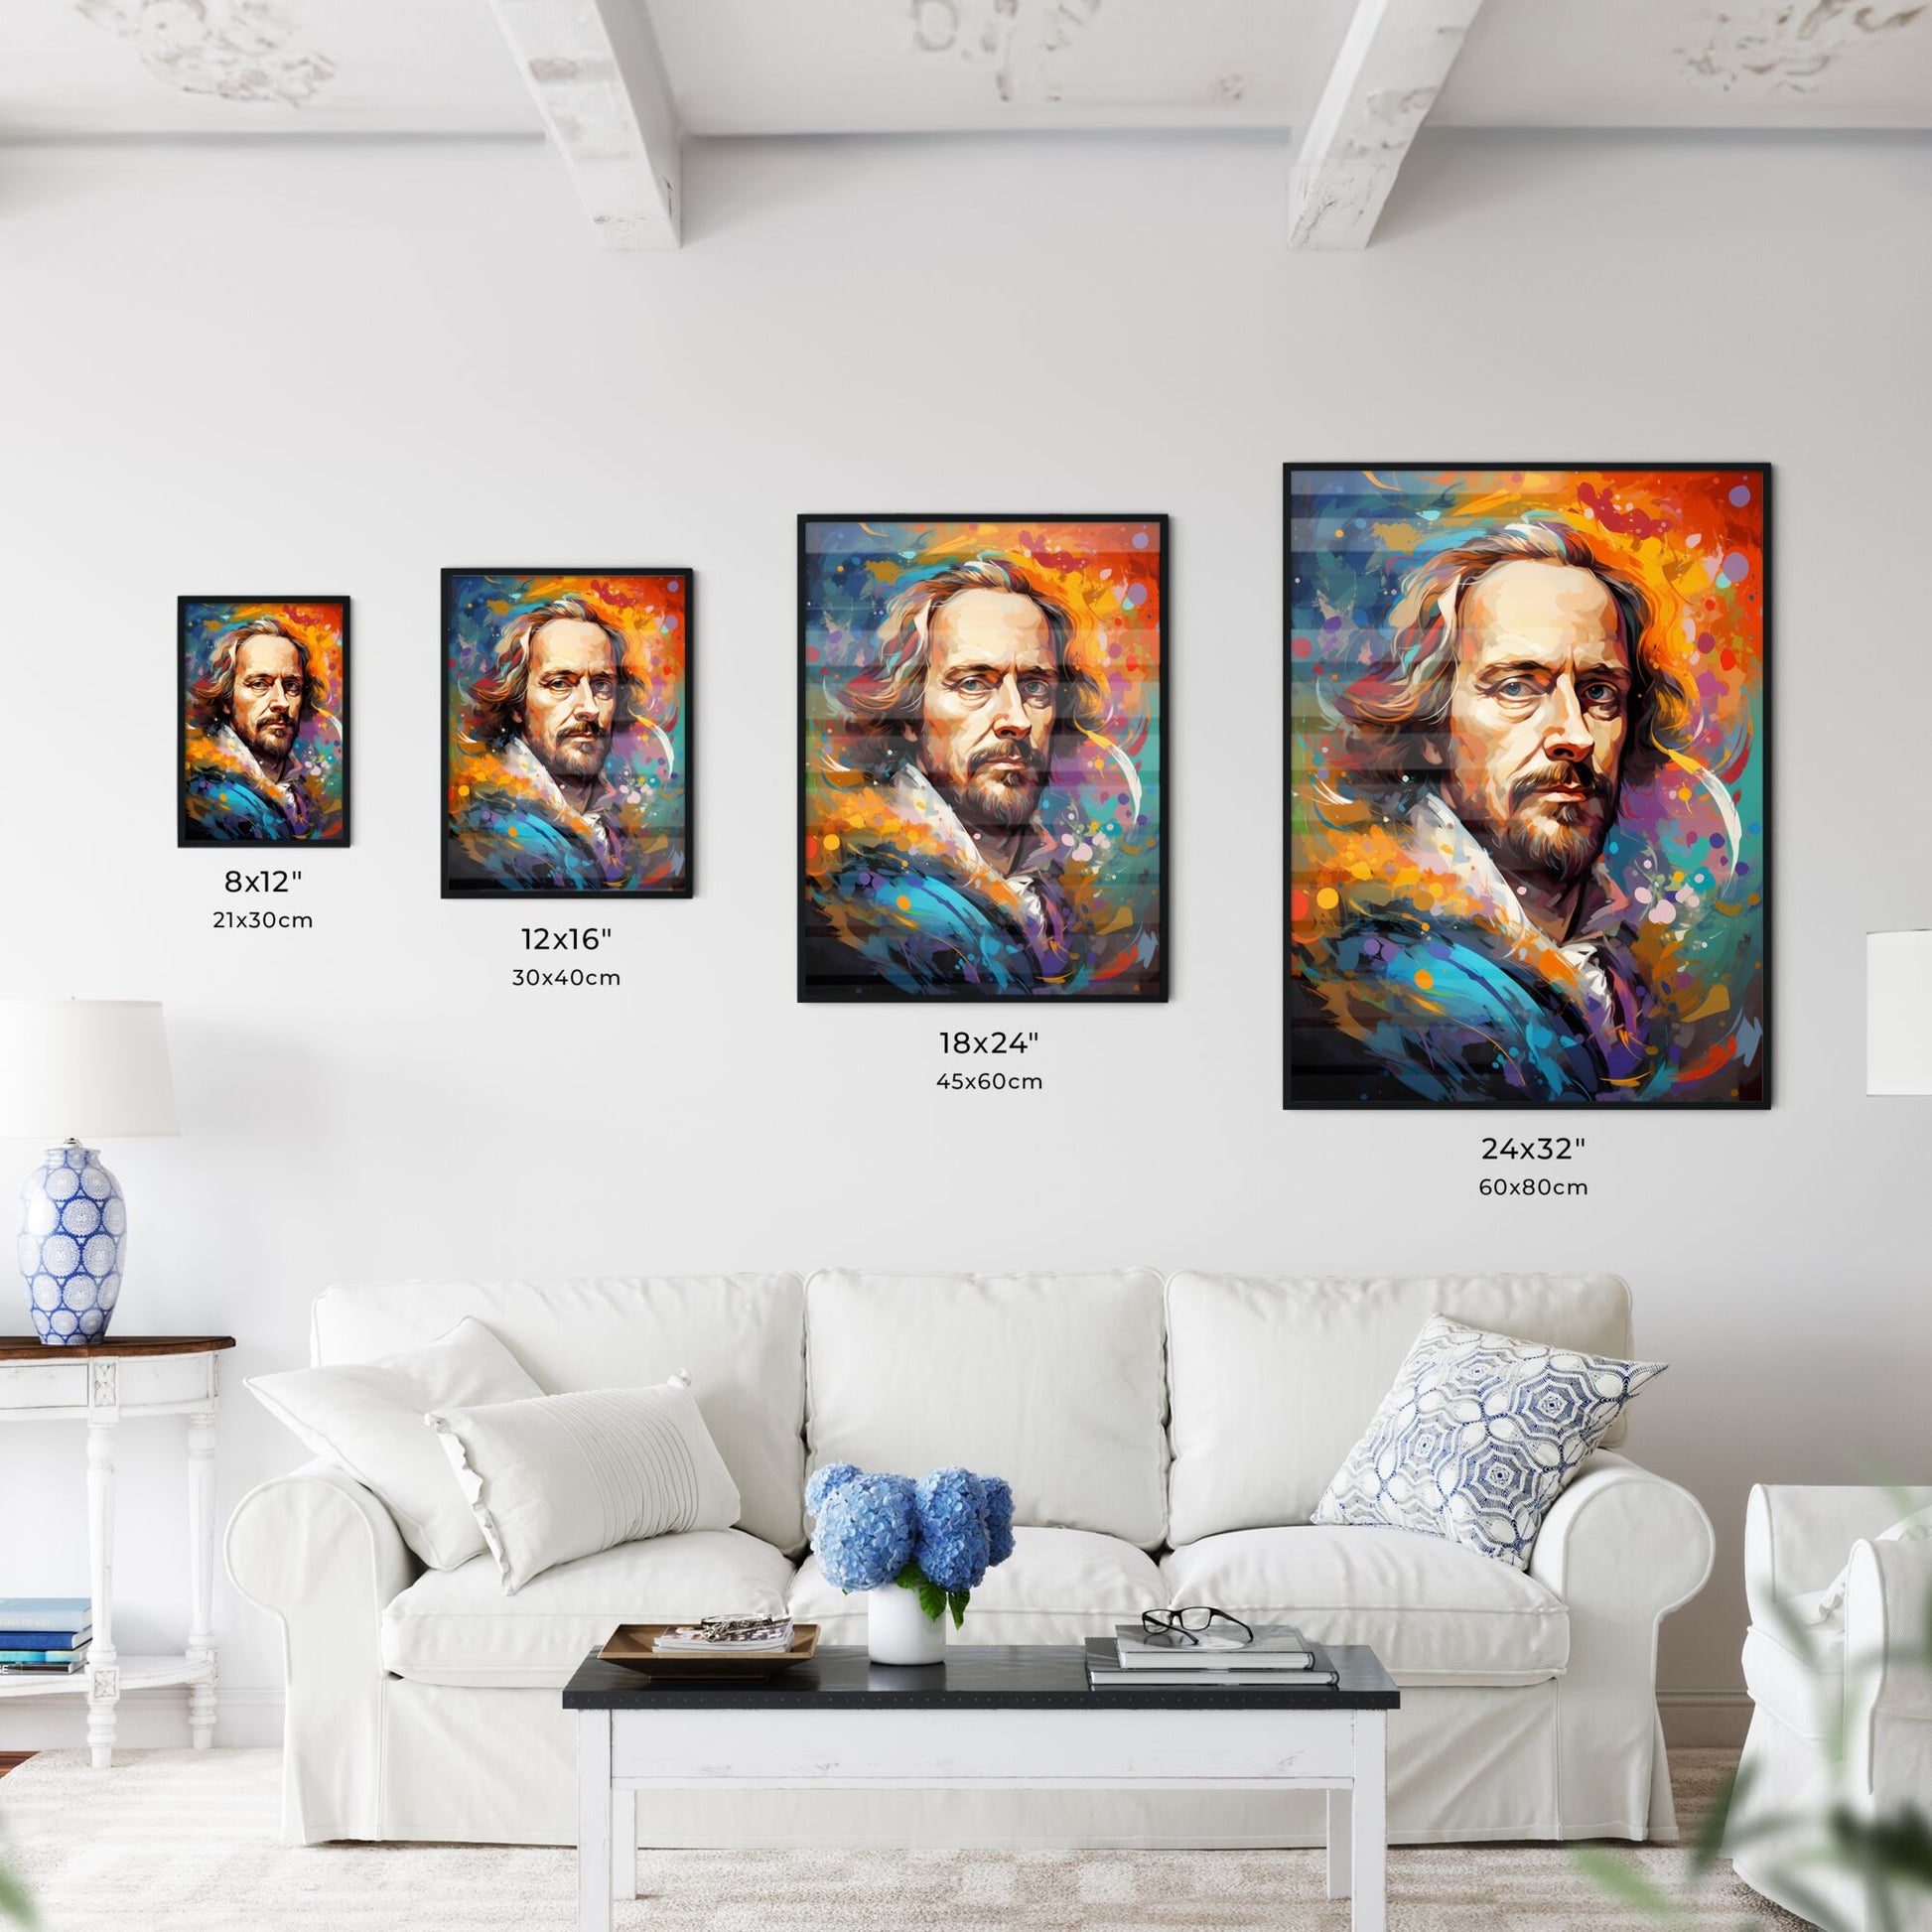 William Shakespeare - A Painting Of A Man With A Beard Default Title